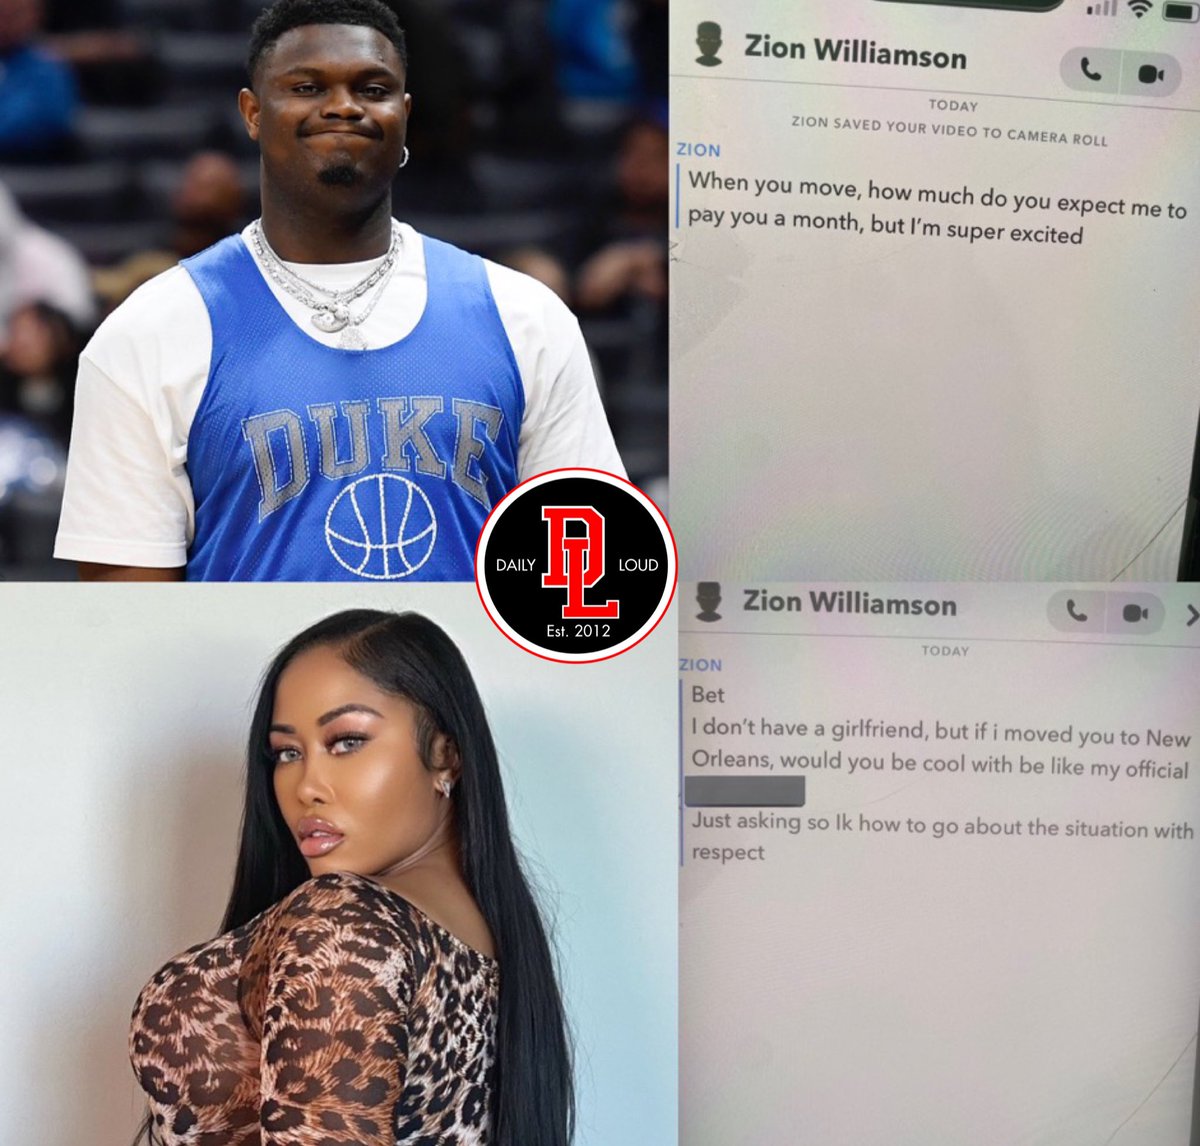 Adult film star Moriah Mills exposes Zion Williamson for having a baby with another woman instead of her 🤯👀